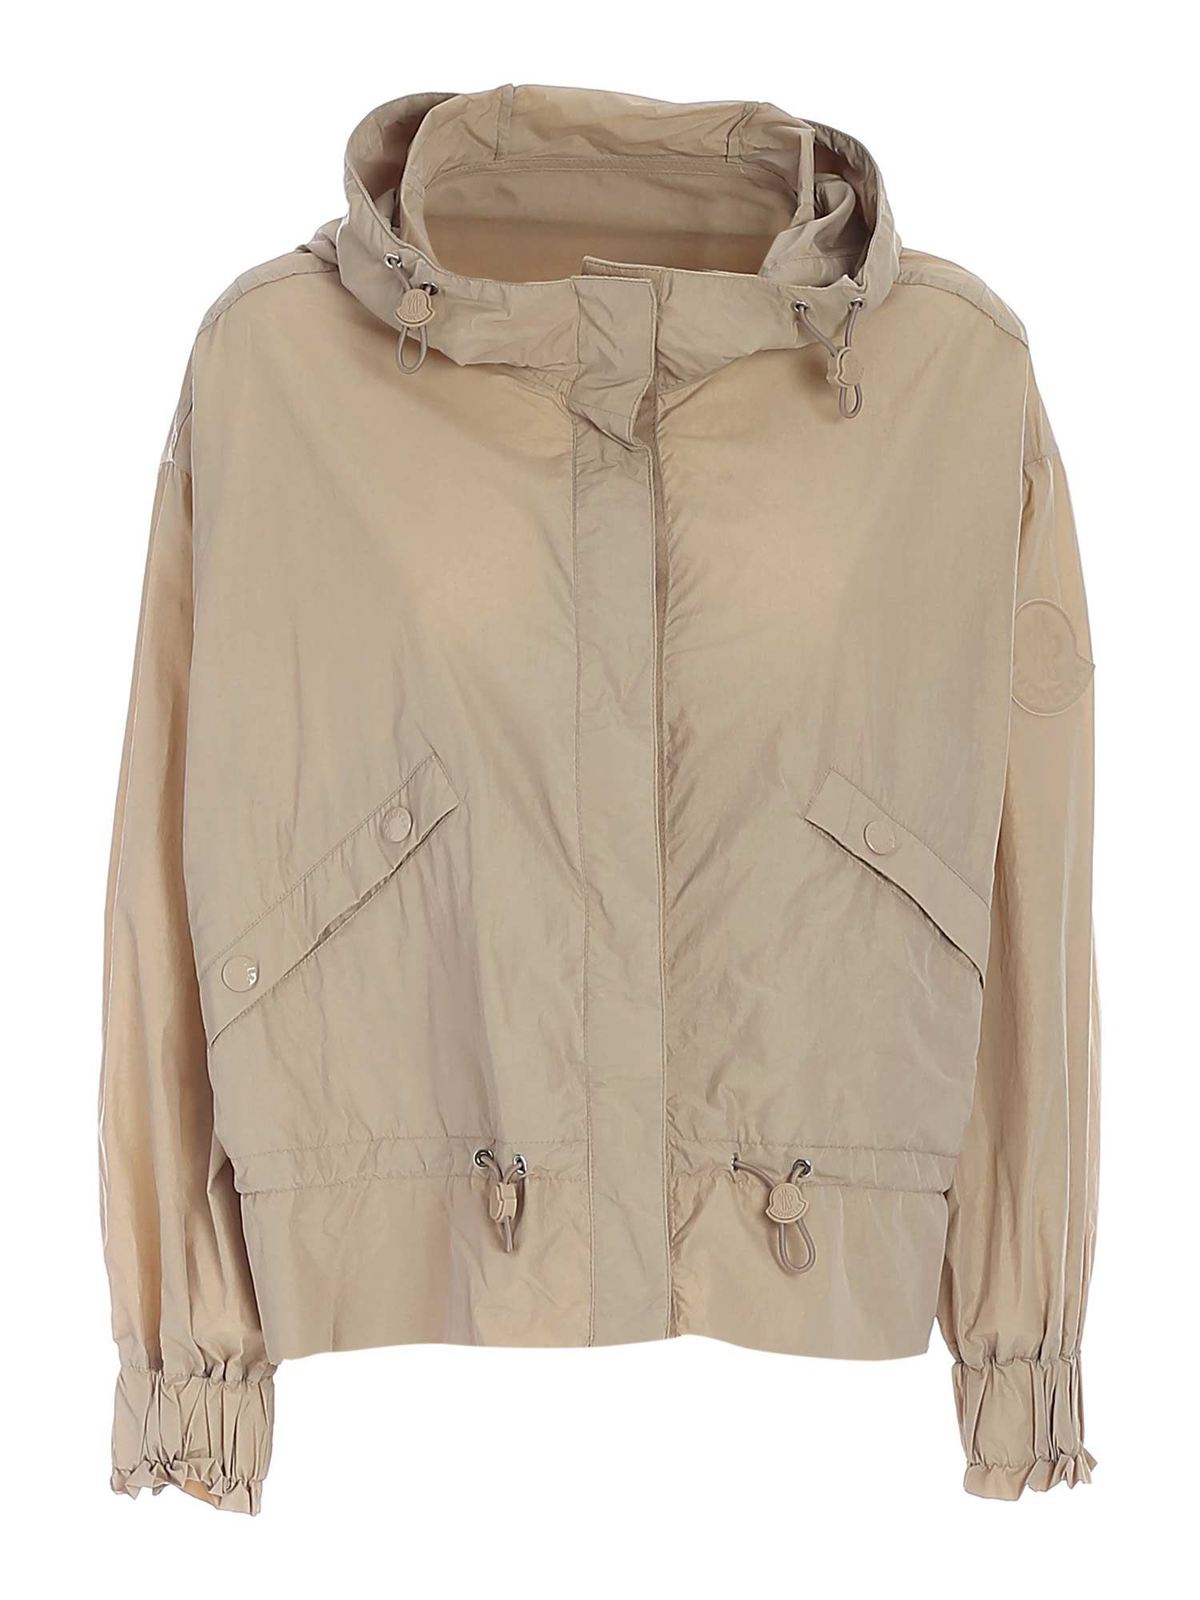 Moncler - Albireo jacket in beige - casual jackets - 1A77000539SS221